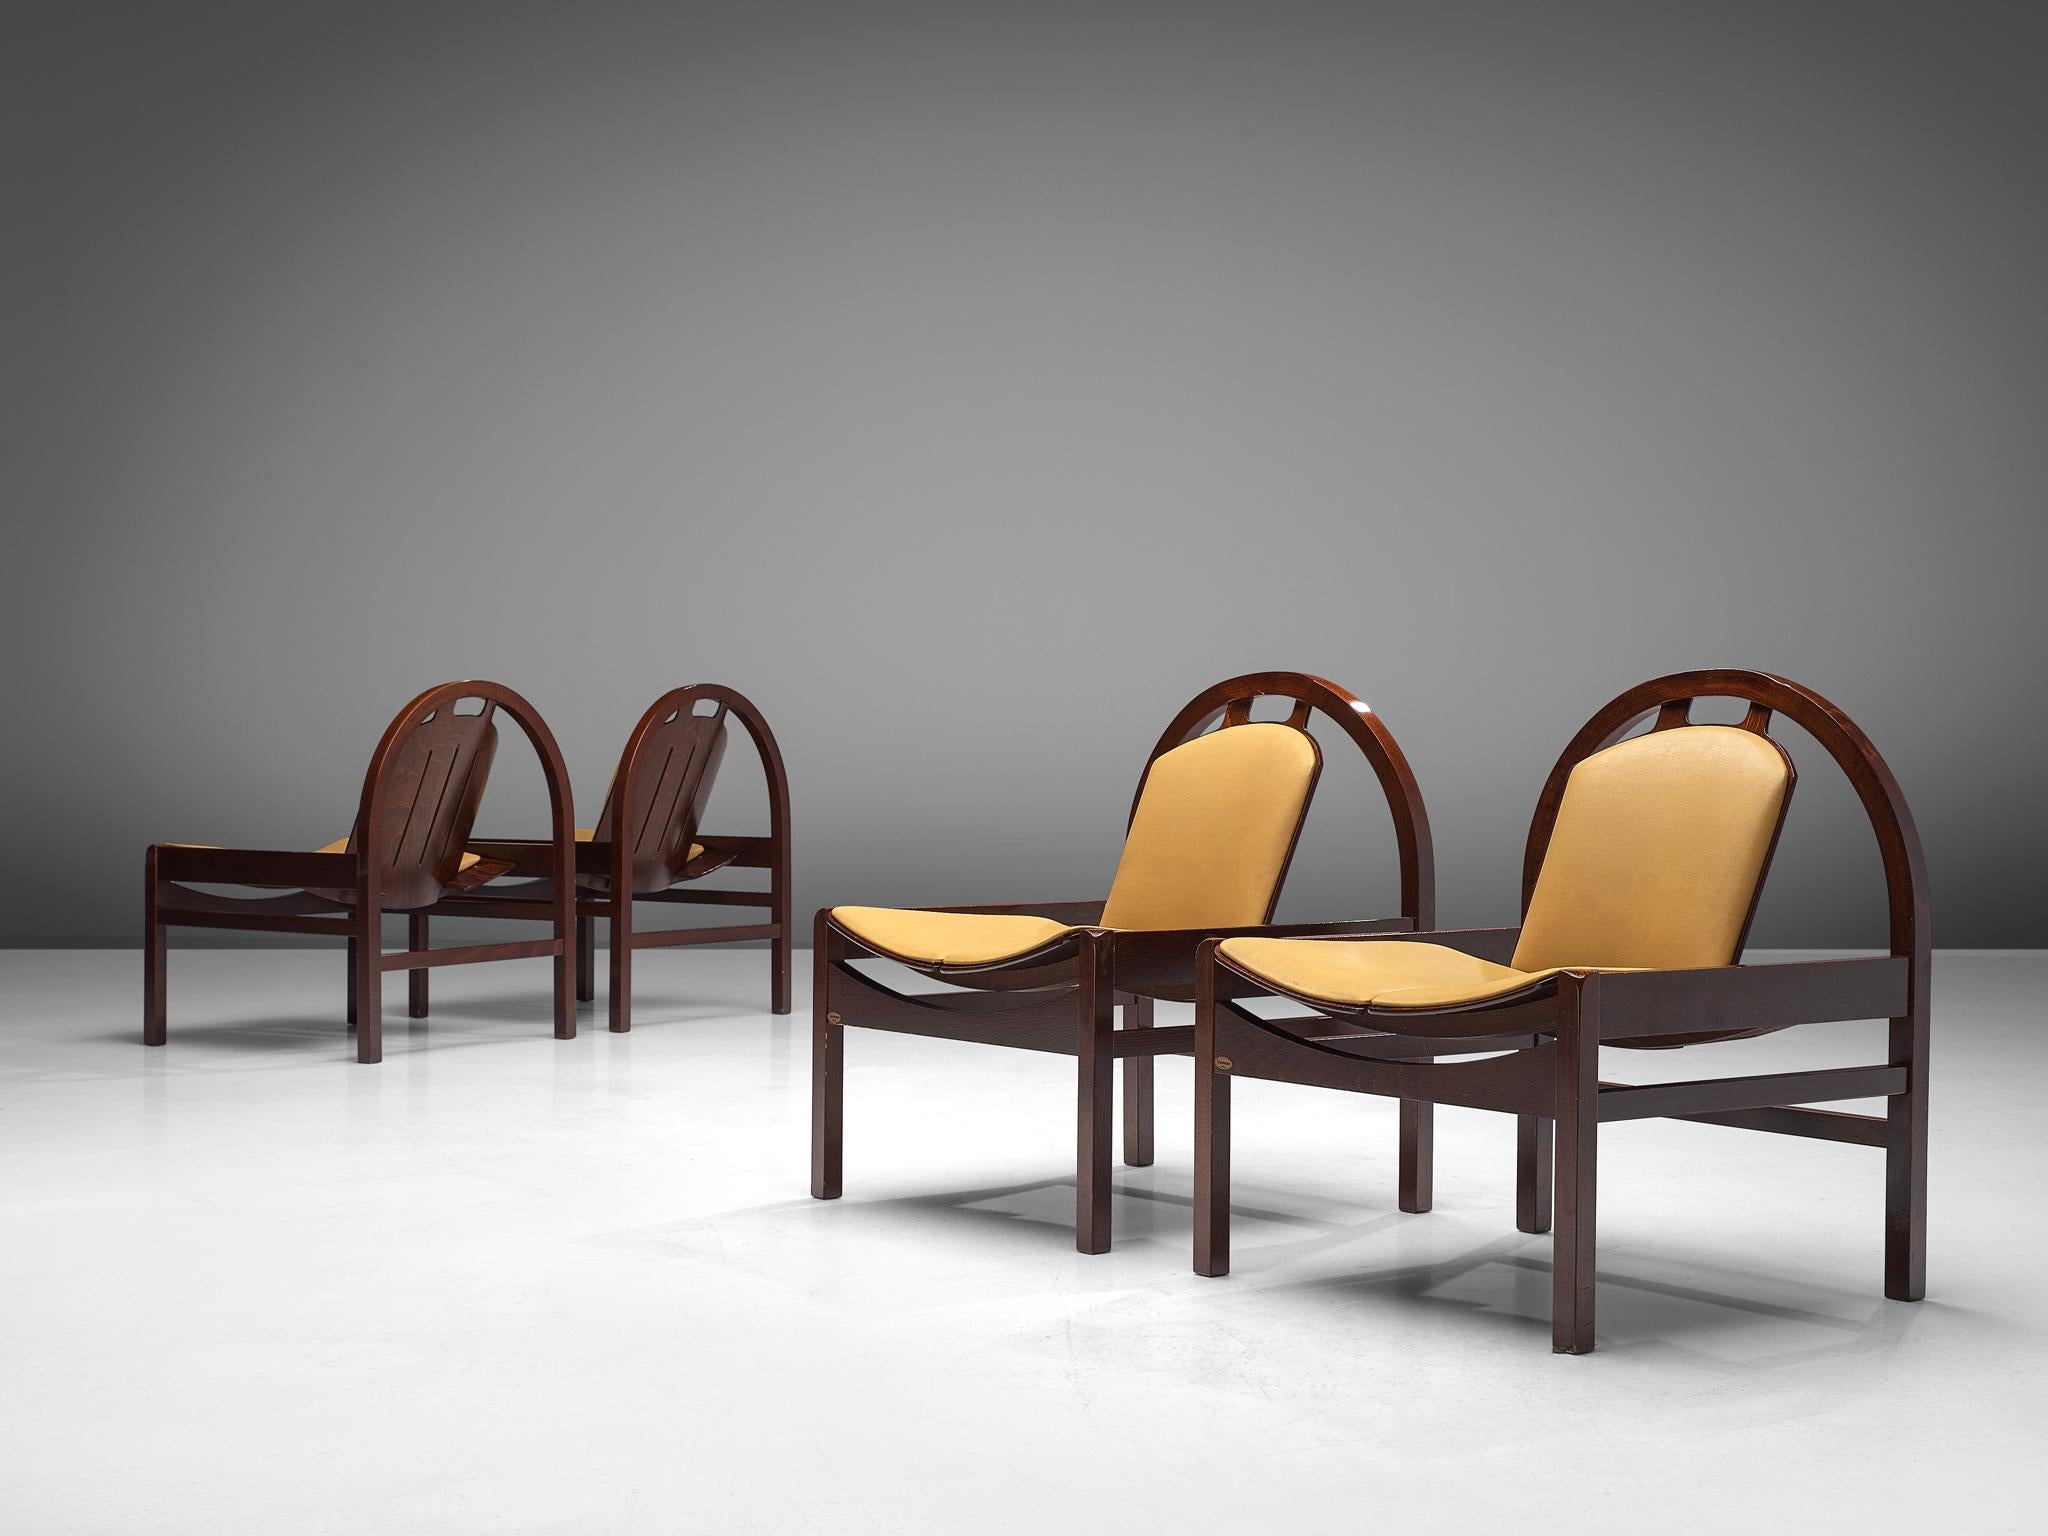 Baumann, set of four 'Argos' easy chairs, beech and leather, France, 1970s

These Argos lounge chairs are manufactured by Baumann in France. The chairs feature a rounded frame that supports the tilted backrest. The tilted seat is wide and low and